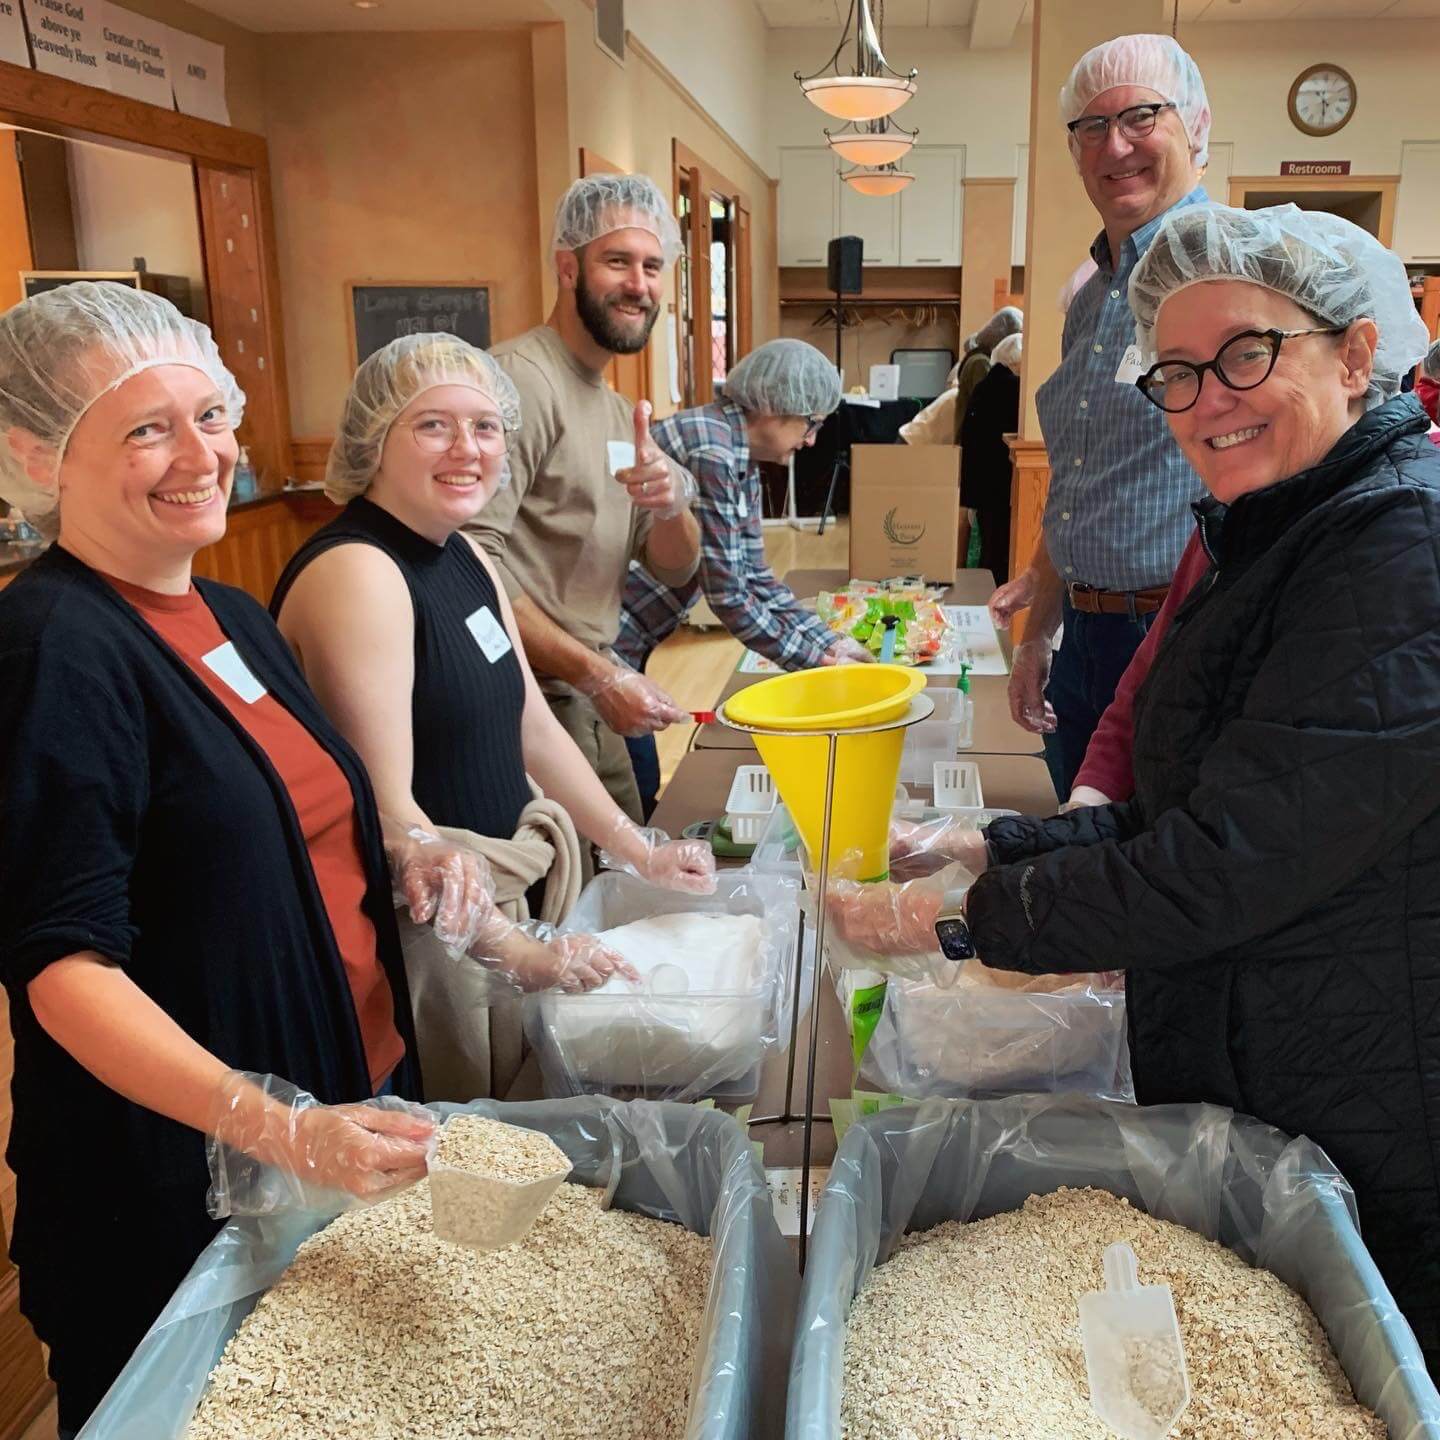 A group of smiling people packing food for a food shelf